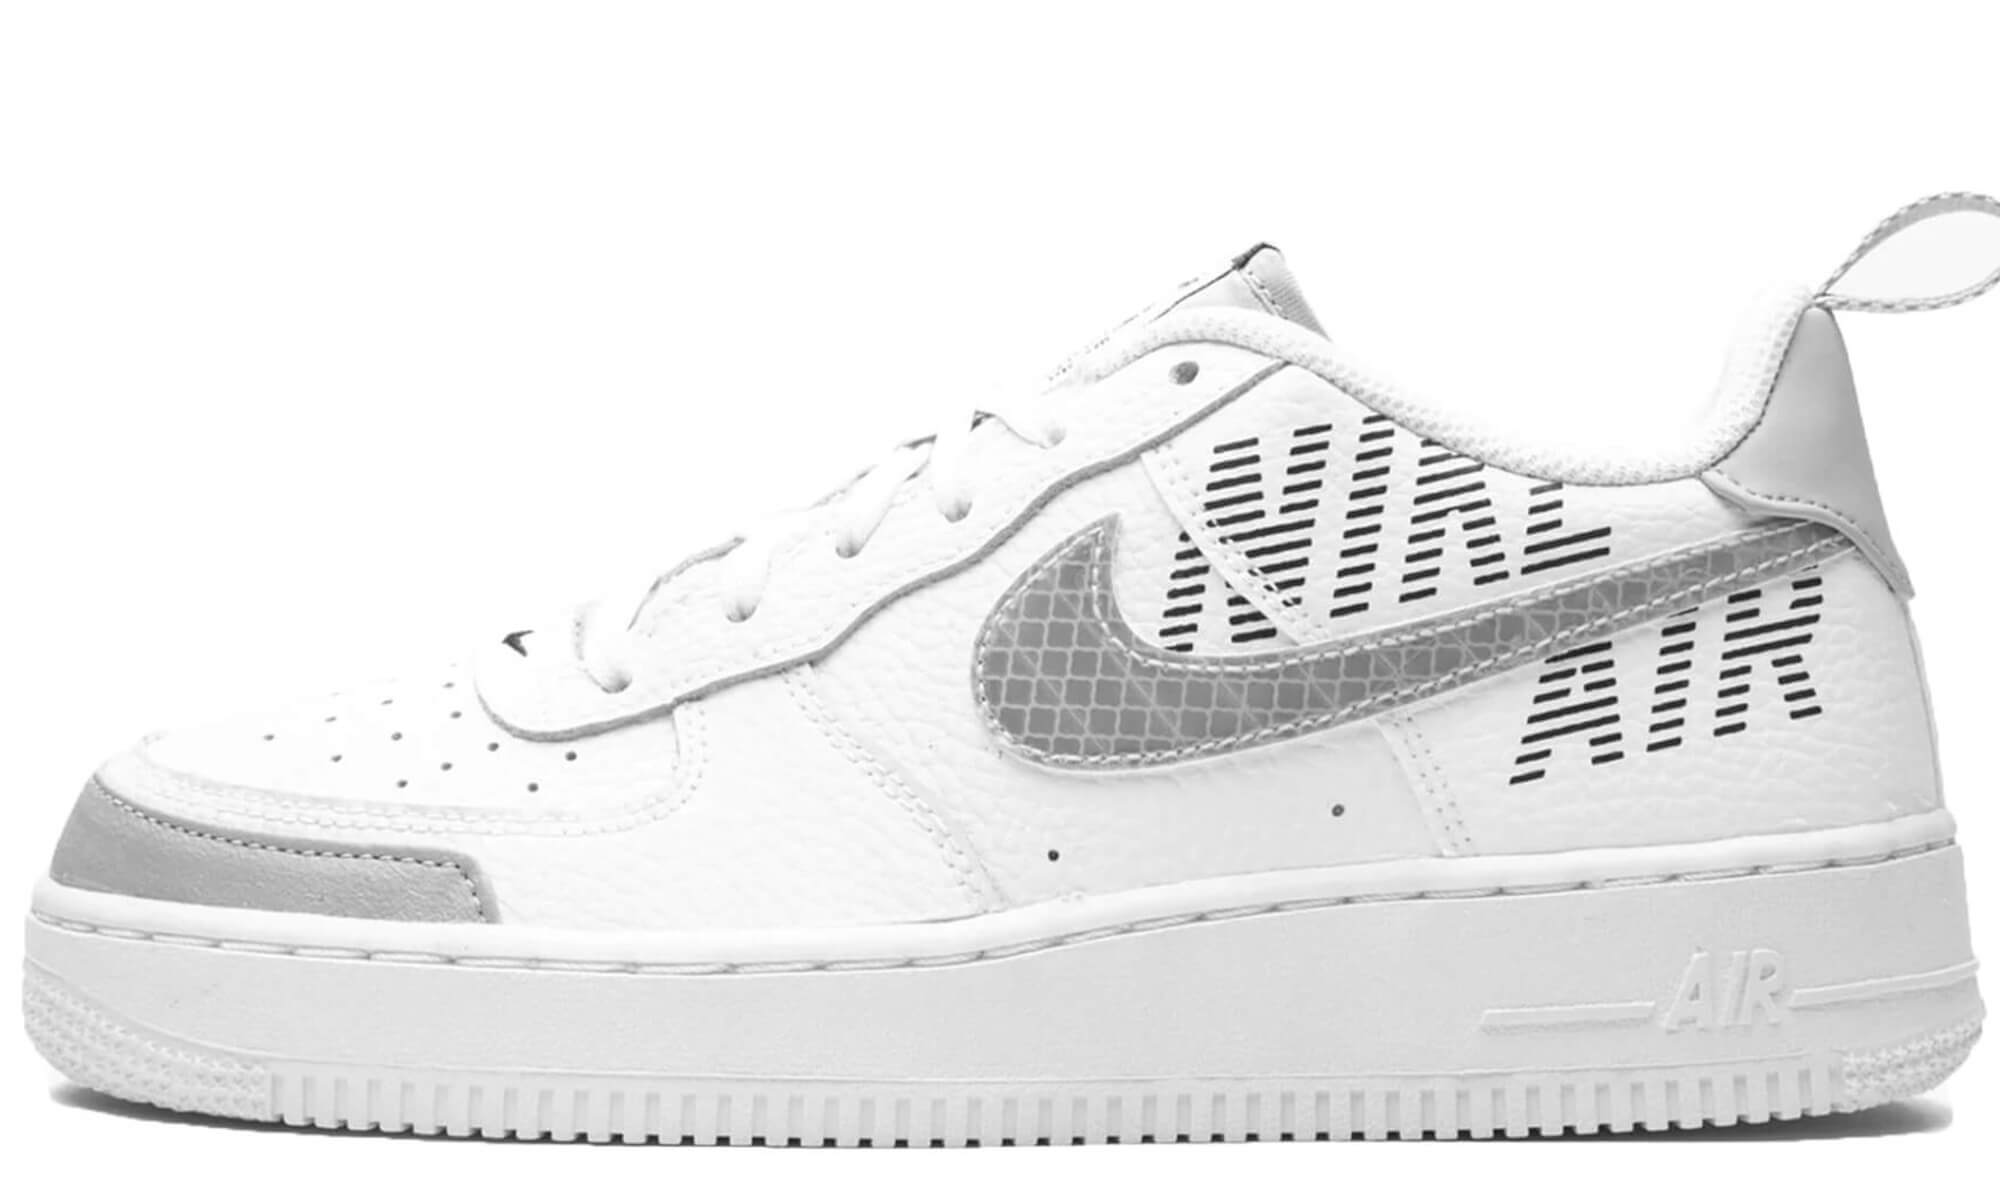 Nike Air Force 1 LV8 2 'White/Wolf Grey